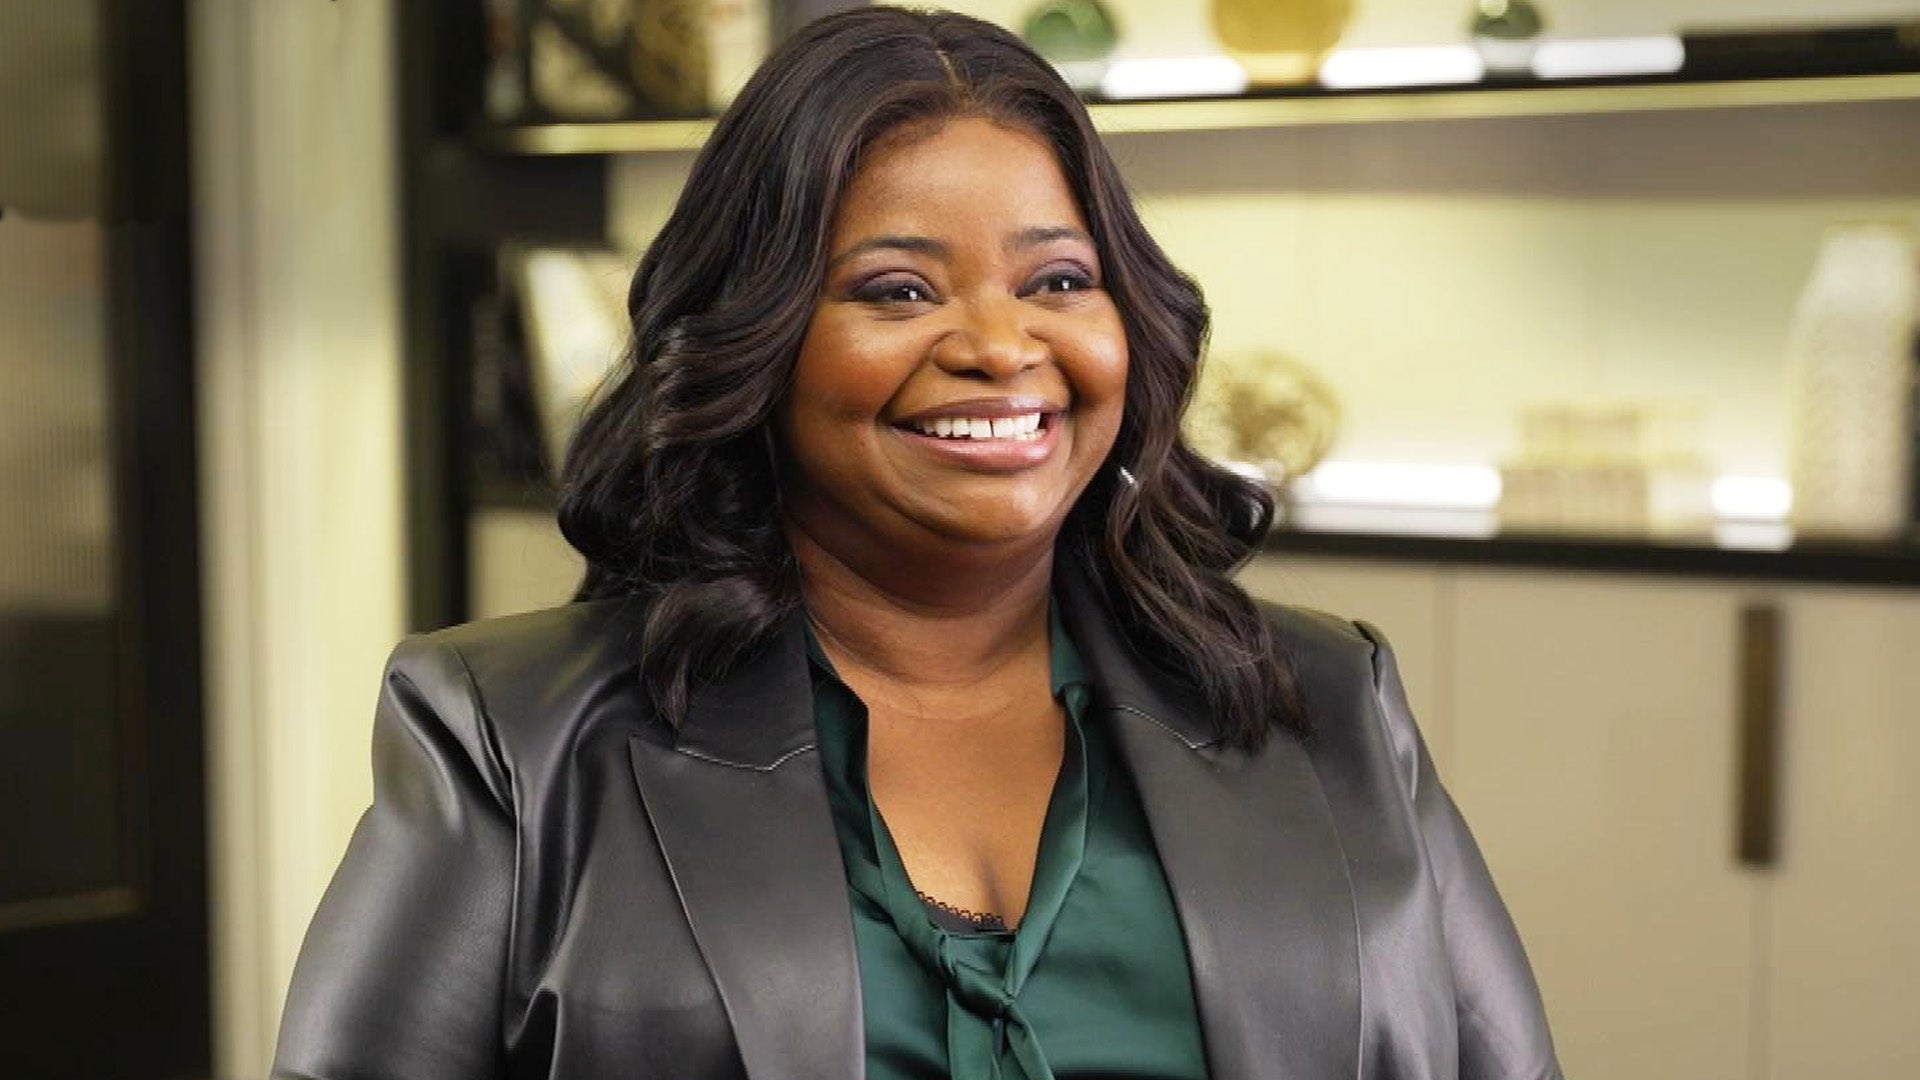 Octavia Spencer: Female Empowerment Movement Can't Be About Women Vs. Men